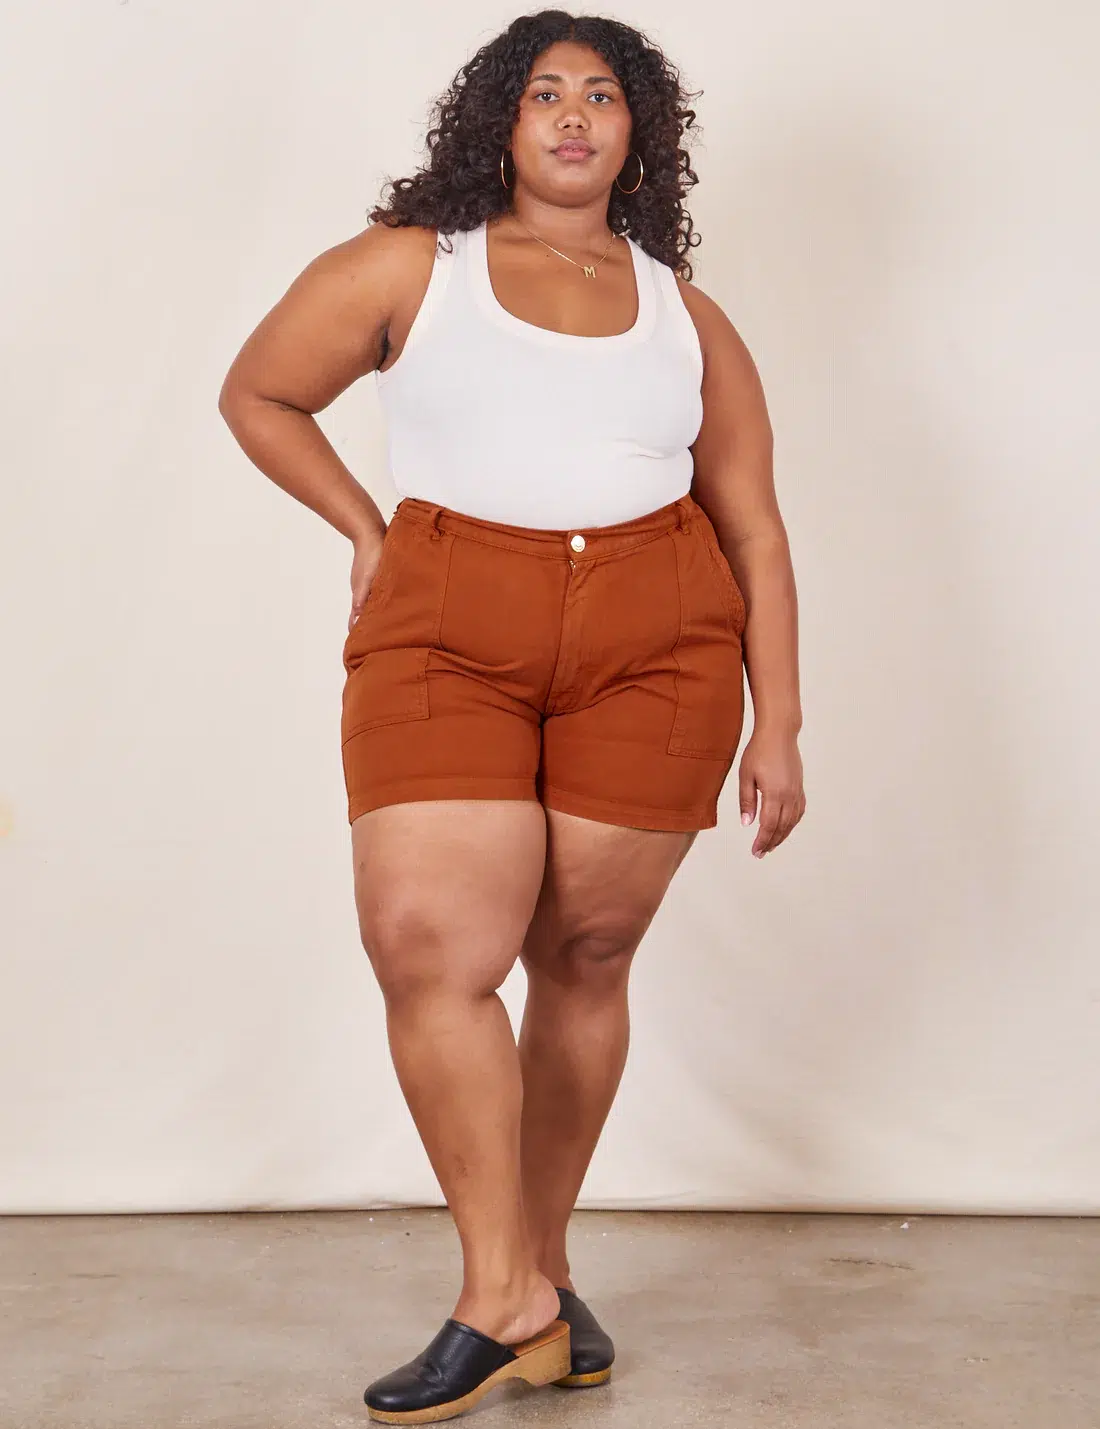 Plus Size Black At Least 20% Sustainable Material Pants.